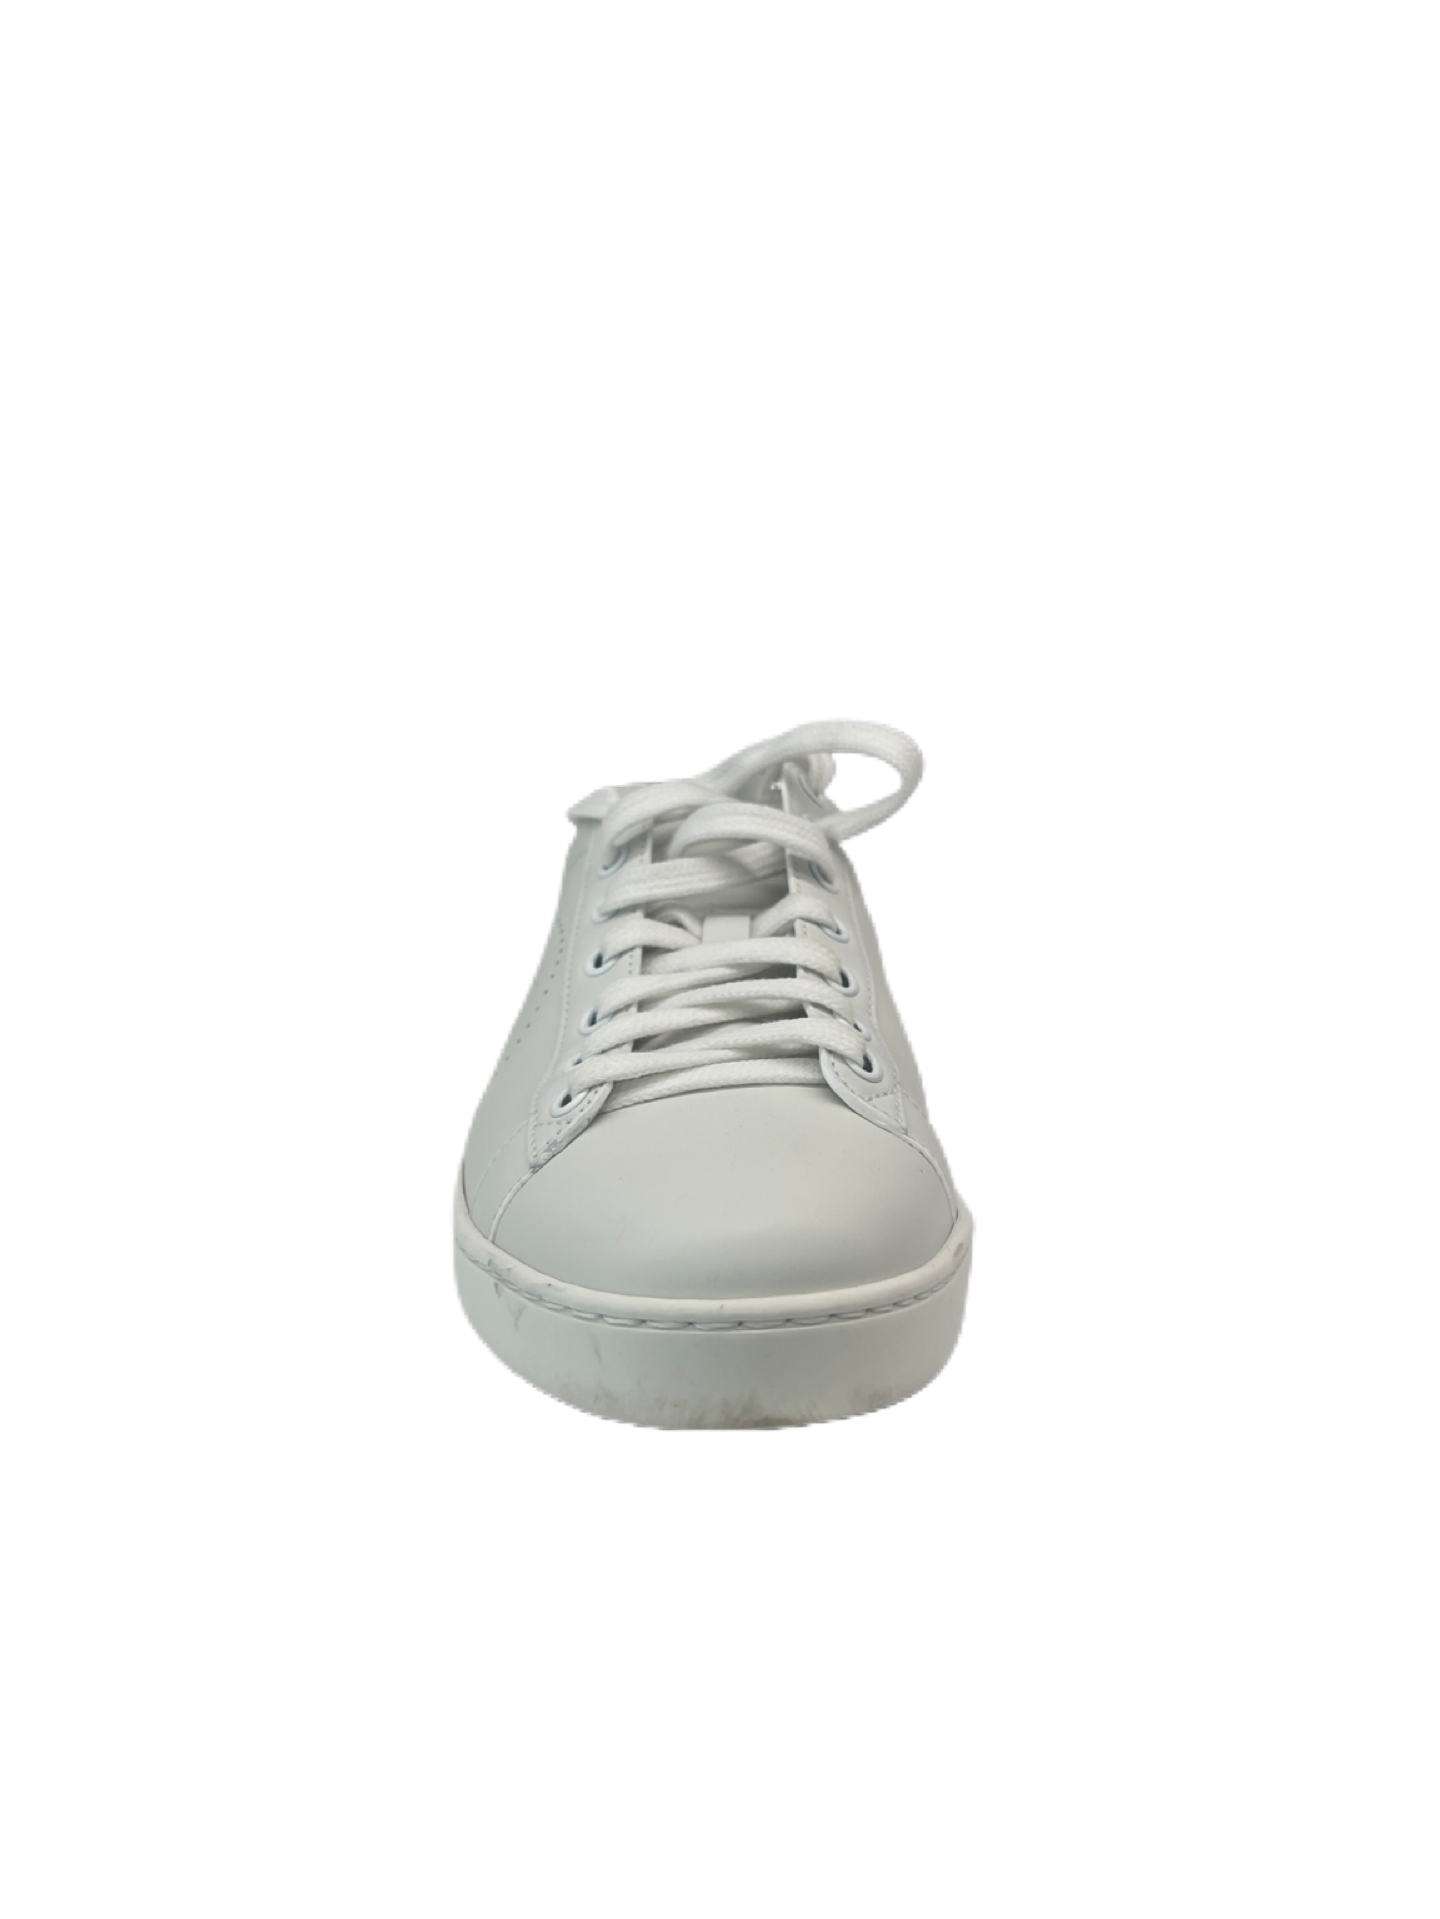 Gucci White Sneakers with Perforated Logo. Size: 38.5